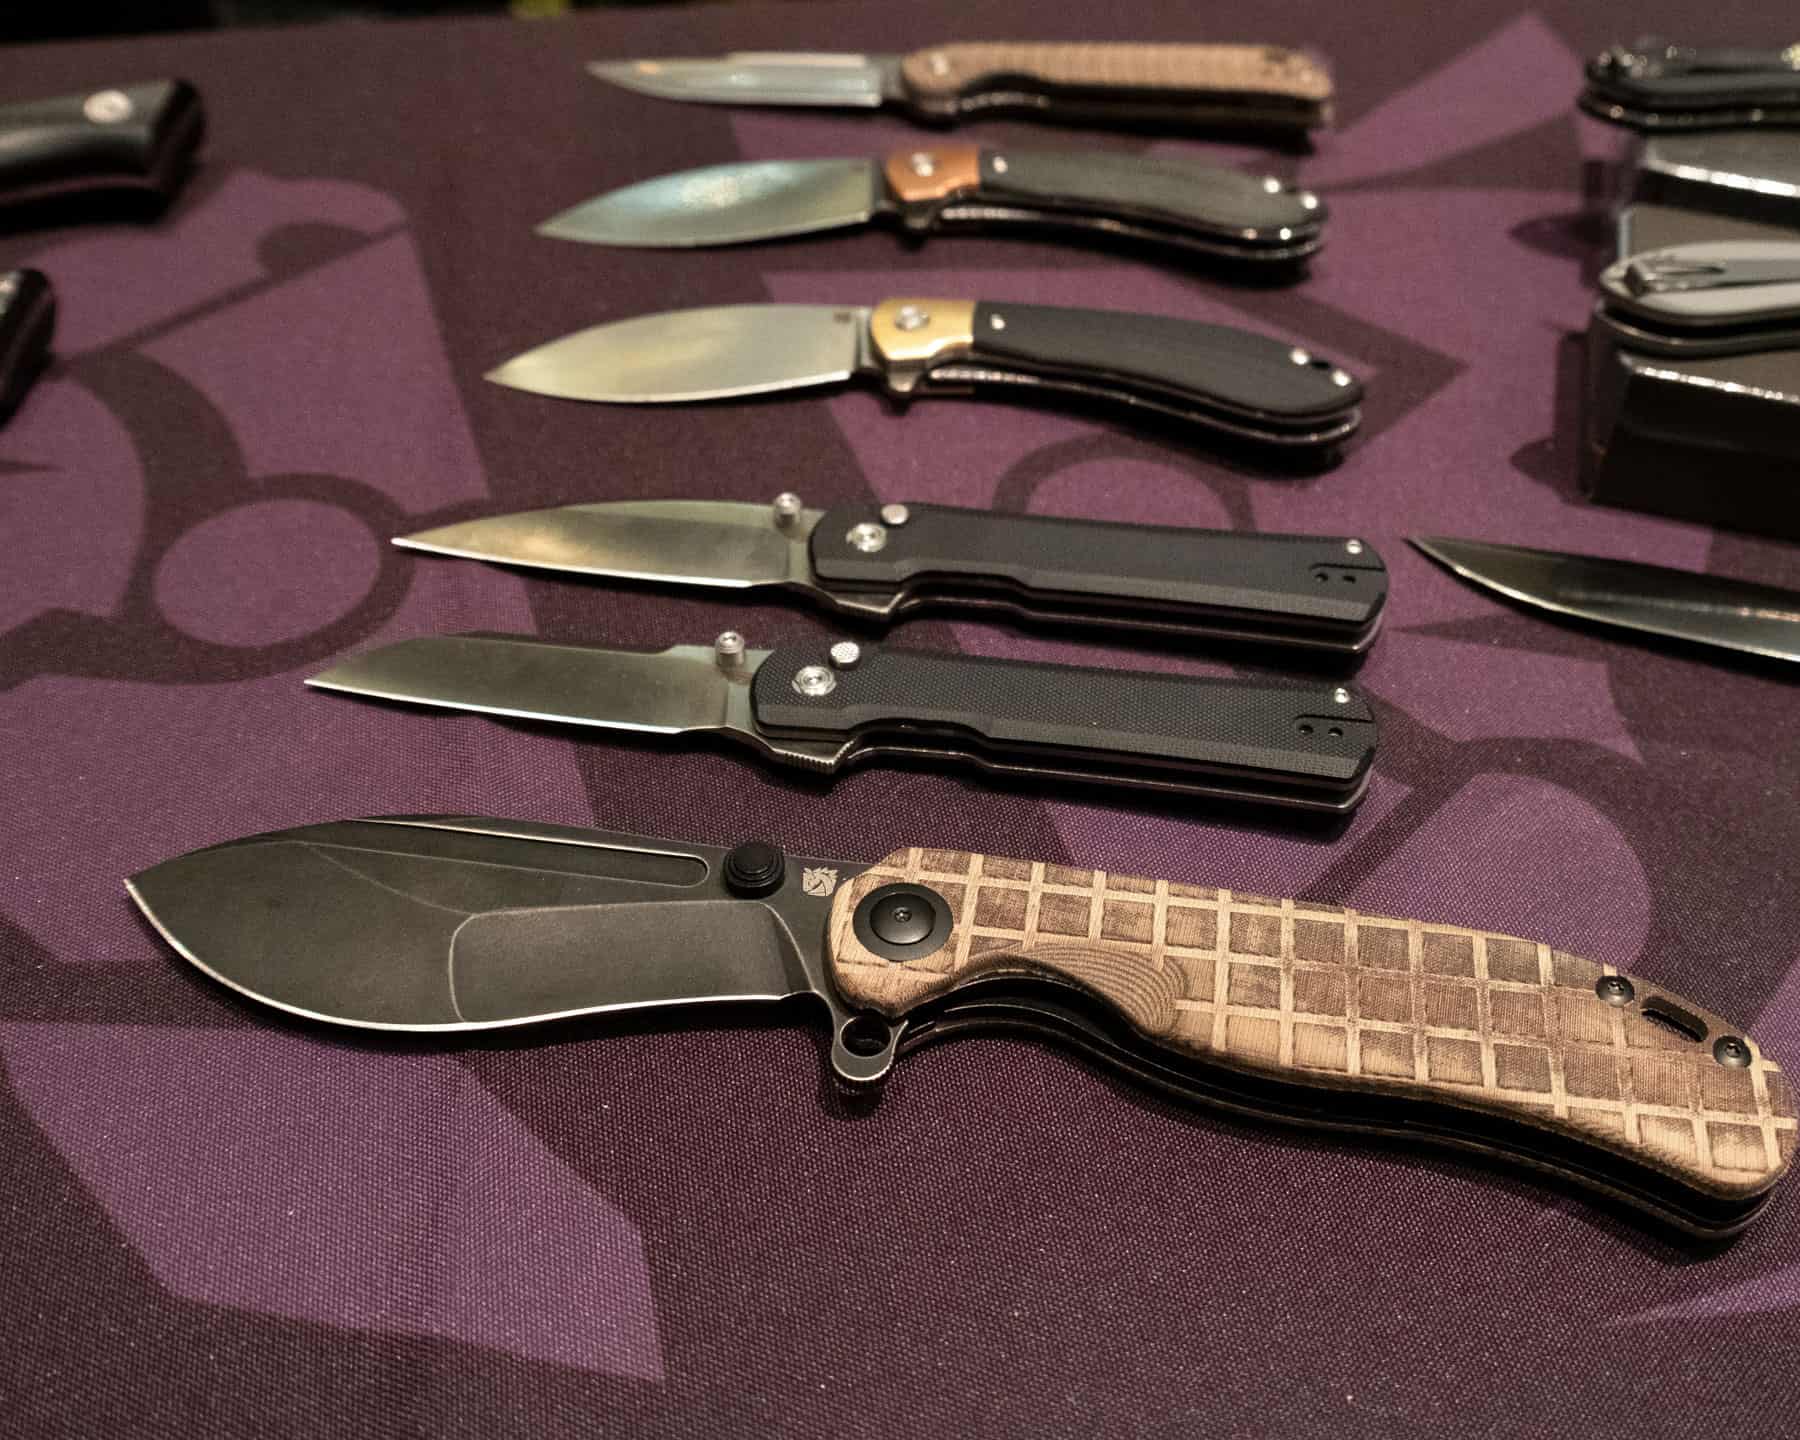 Vosteed Knives' new line-up at Blade Show West 2022.